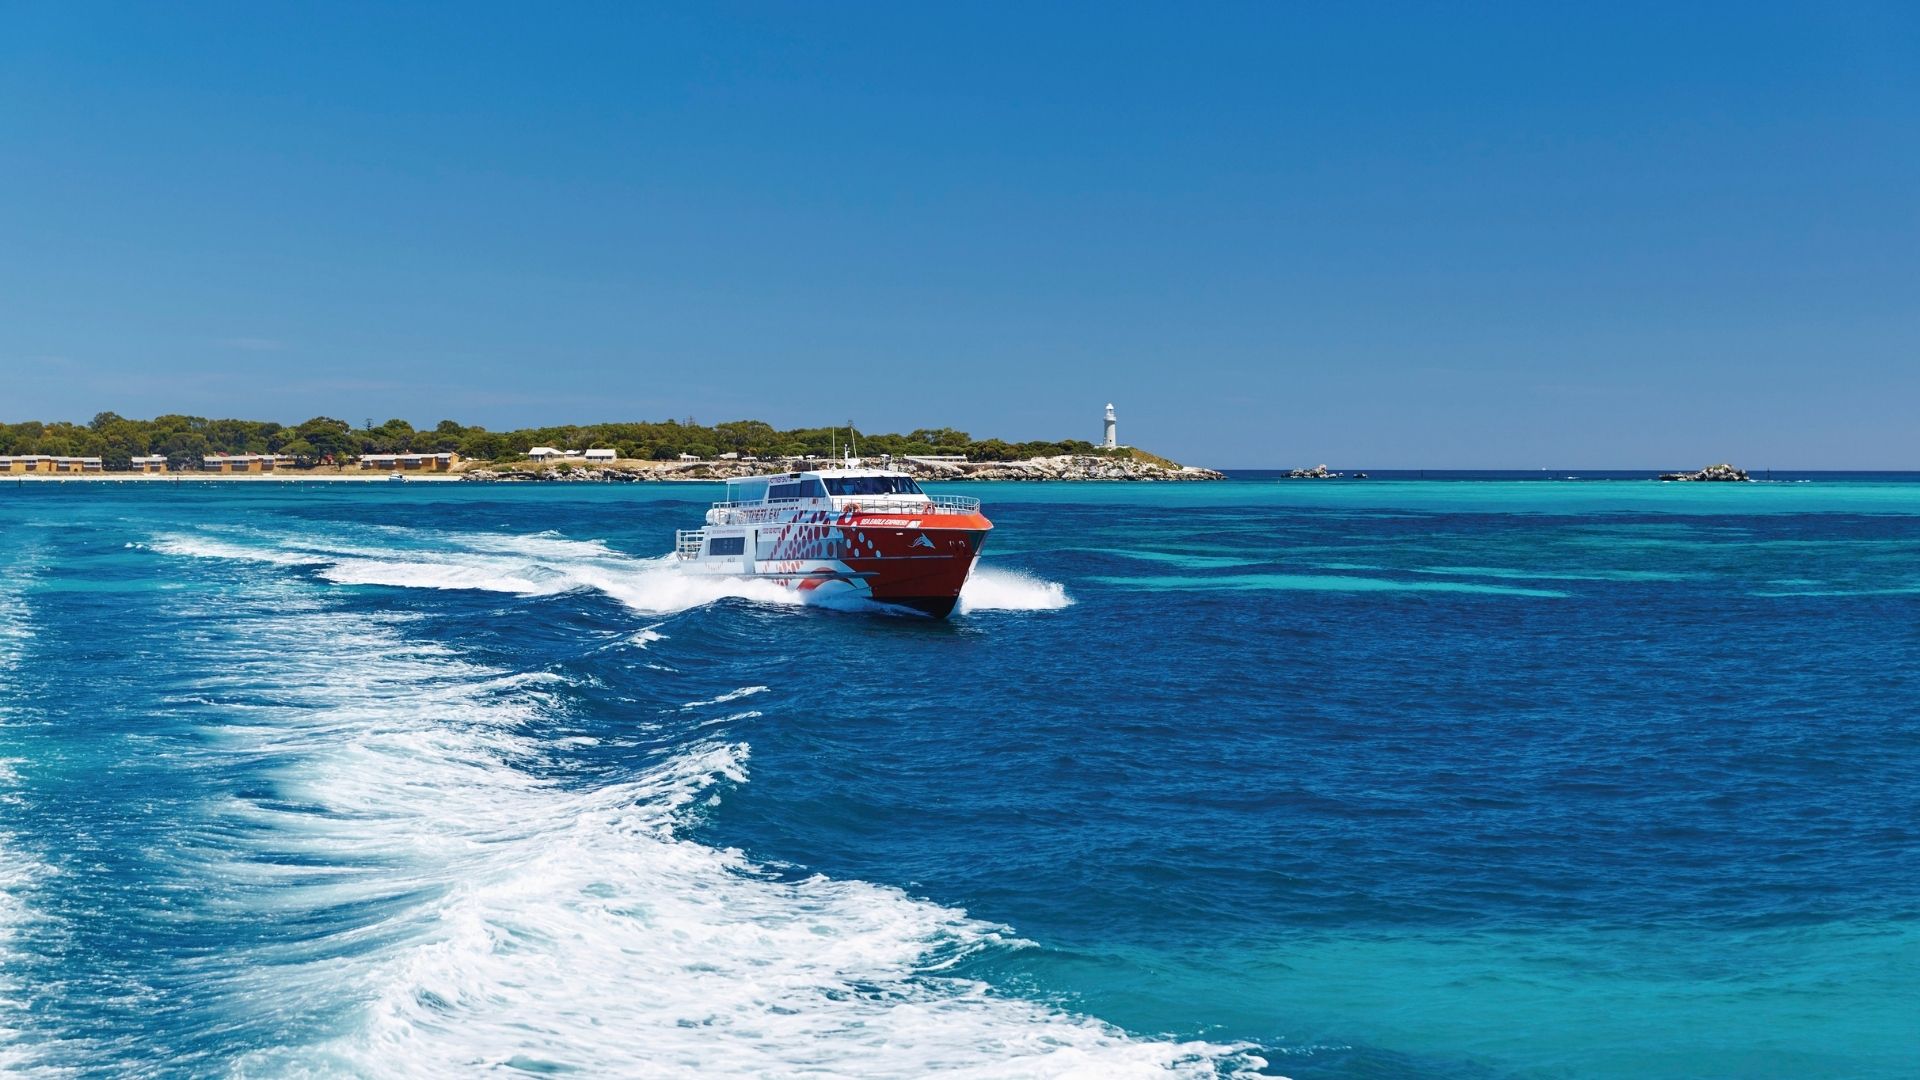 Discoveryparks rottnest island ferries